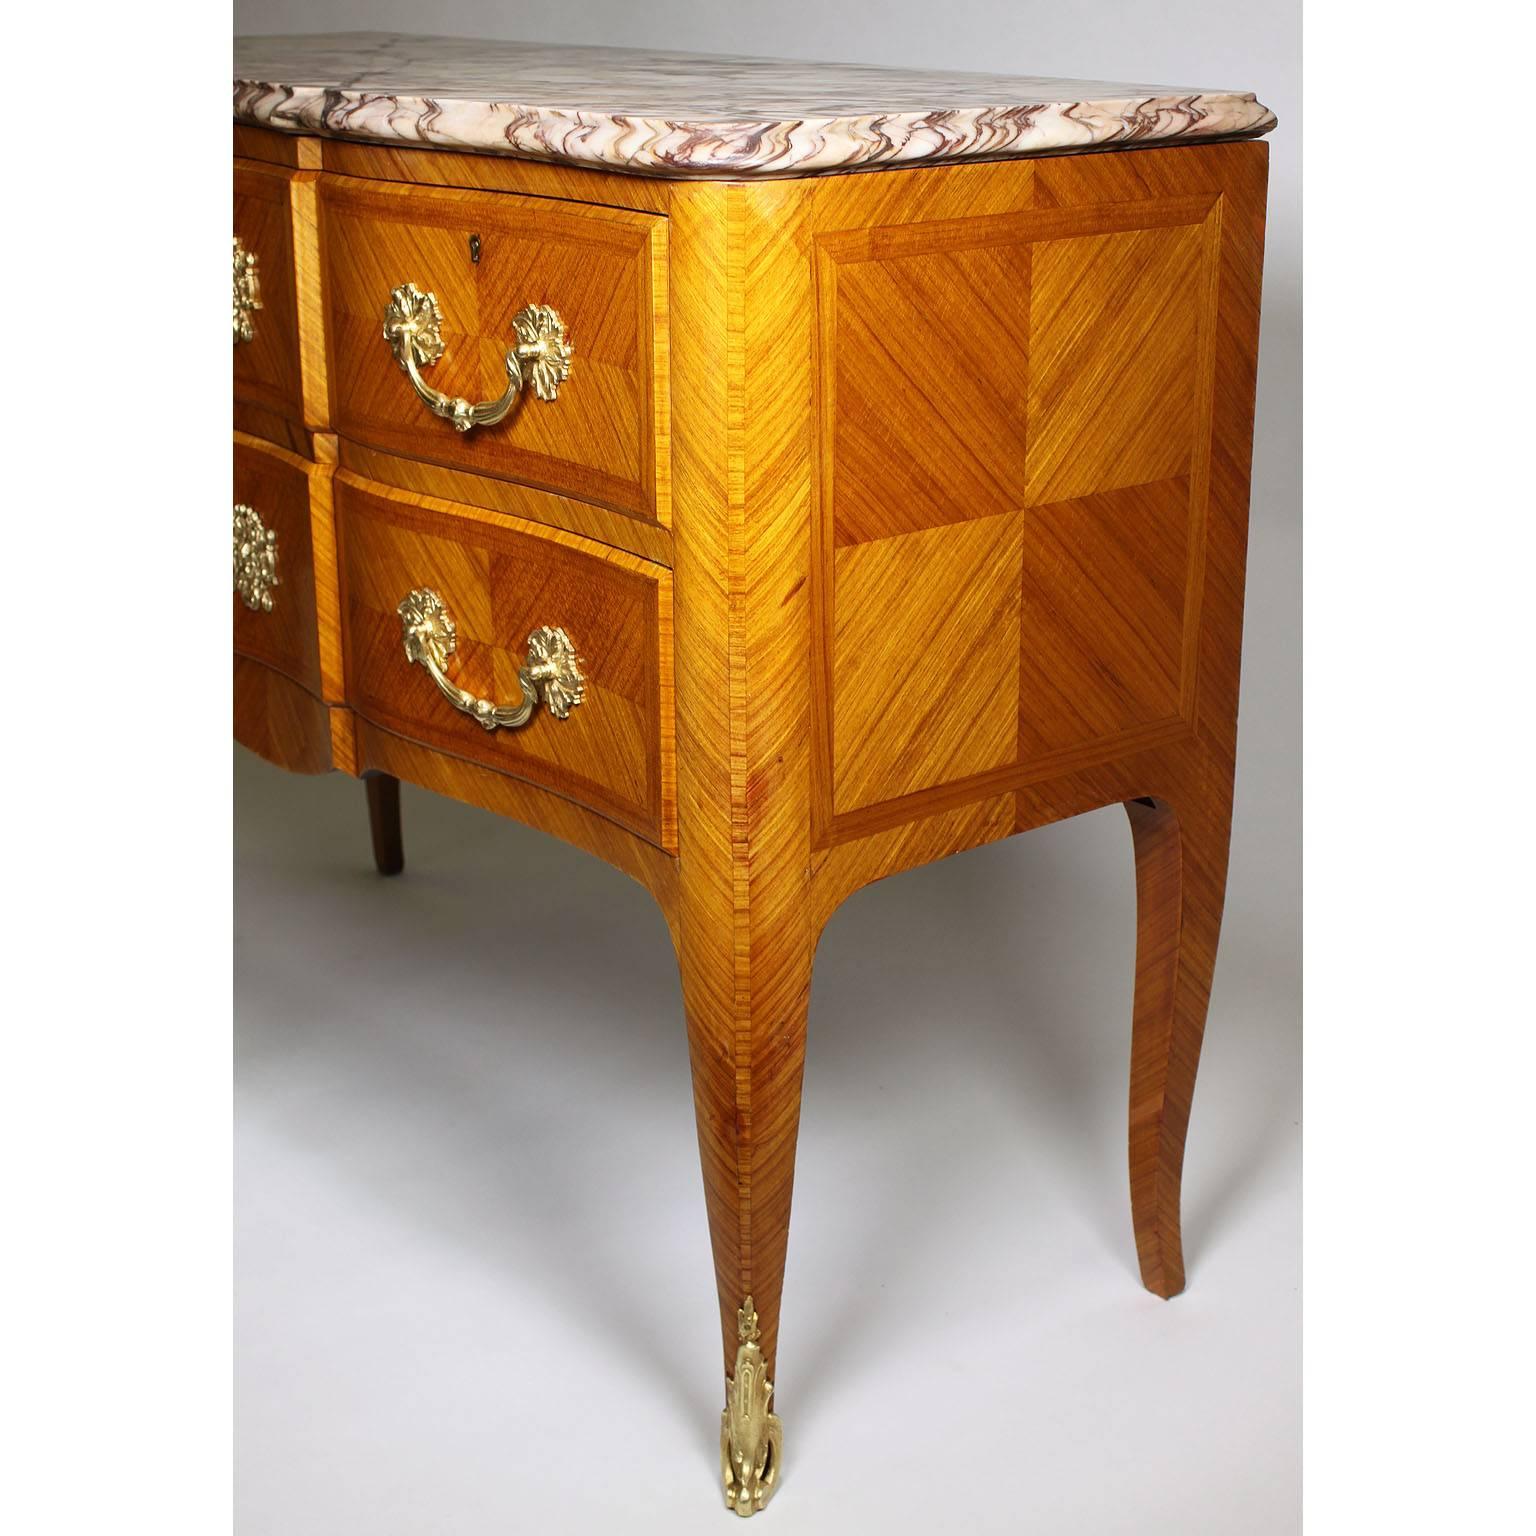 Early 20th Century French 19th-20th Century Louis XV Style Stainwood & Gilt-Bronze Mounted Commode For Sale